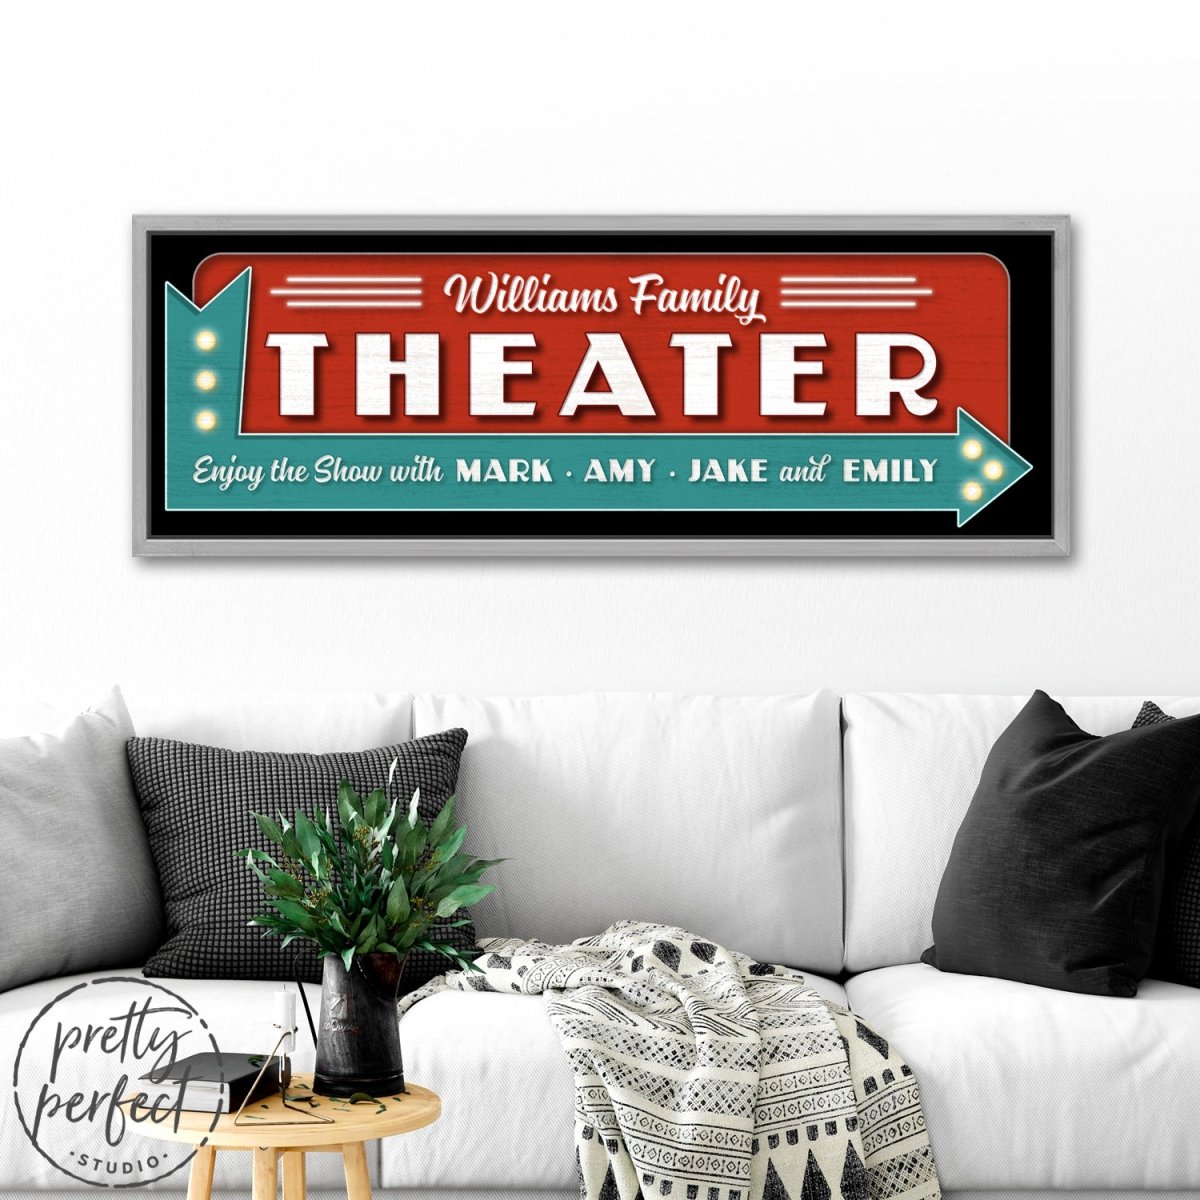 Custom Theater Sign, Personalized Drive-In Movie Painting Arrow Sign for Home Movie Cinema Room